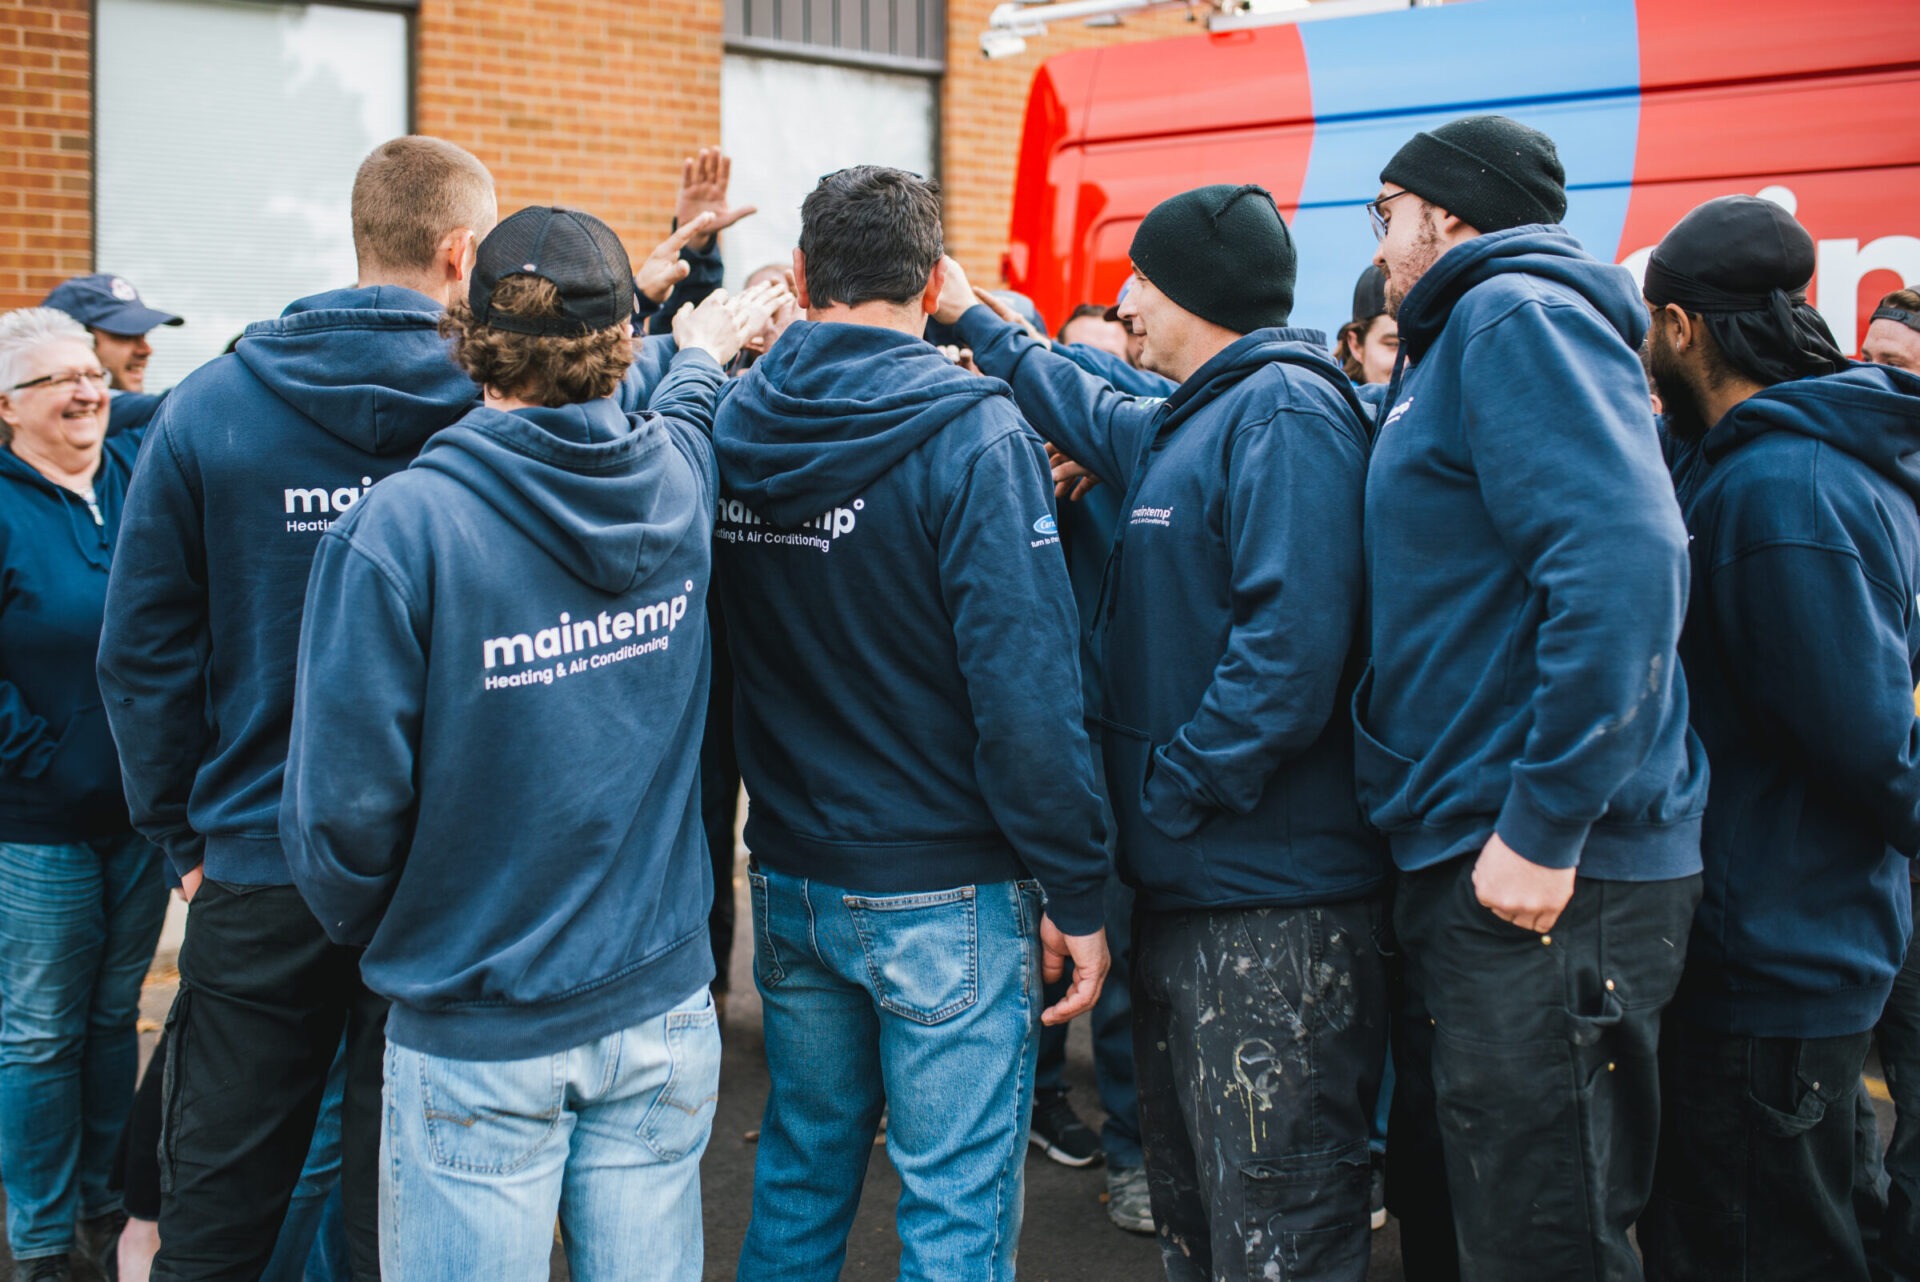 A group of people wearing matching navy blue hoodies with a company logo gathered outside, some with arms raised, possibly celebrating or team-building.